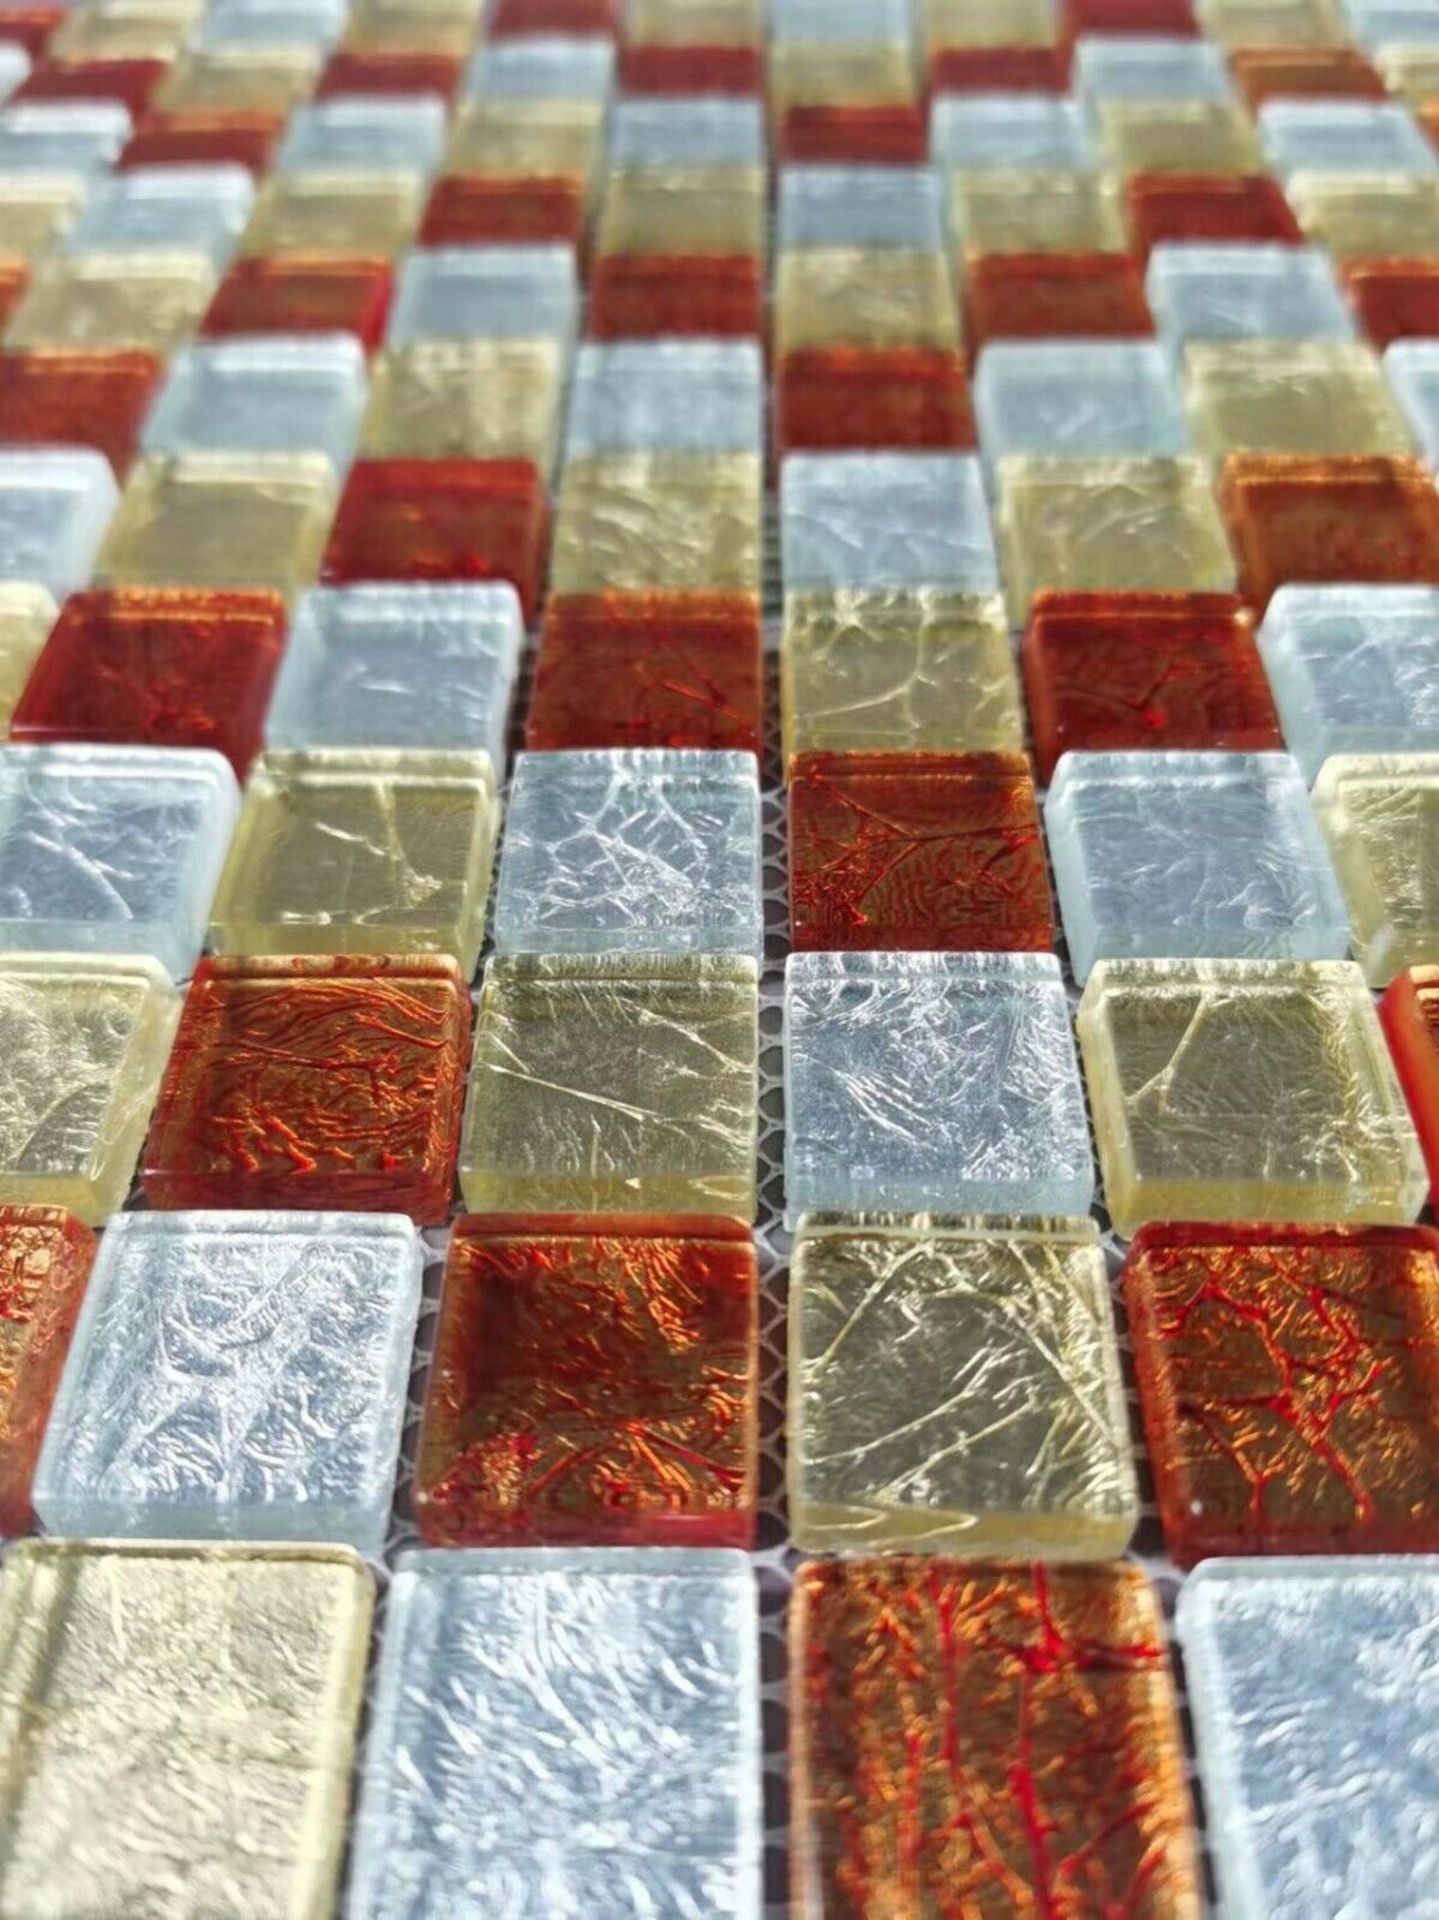 Stock Clearance High Quality Glass/Stainless Steel Mosaic Tiles - 11 Sheets - One Square Metre - Image 2 of 4